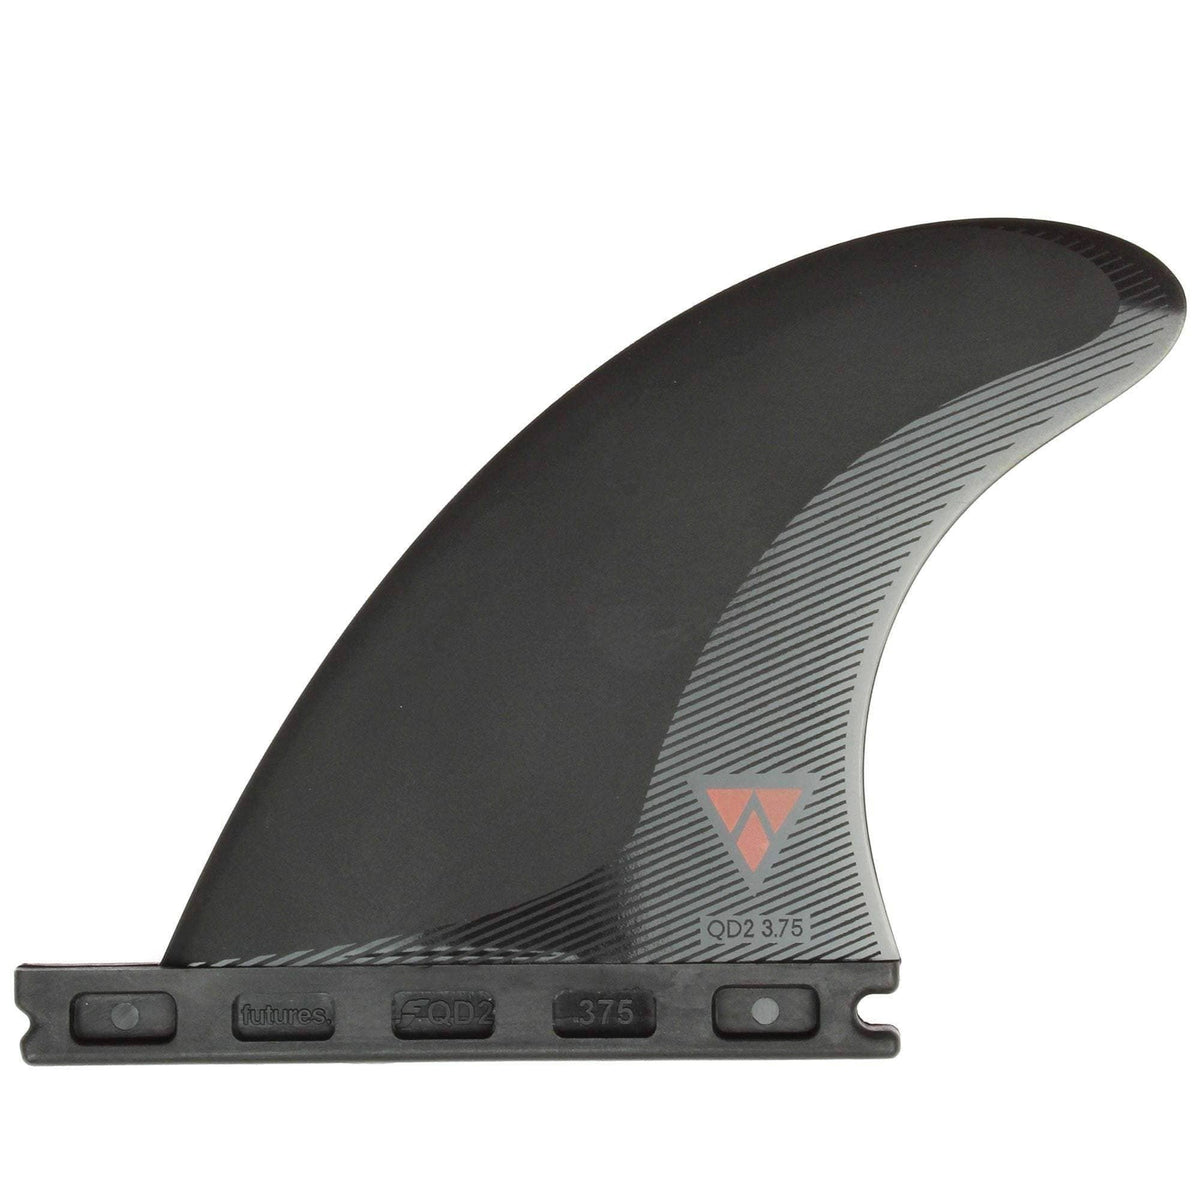 Futures Alpha 3.75 Quad Rear Surfboard Fins Futures Single Tab Fins by Futures Small Fins